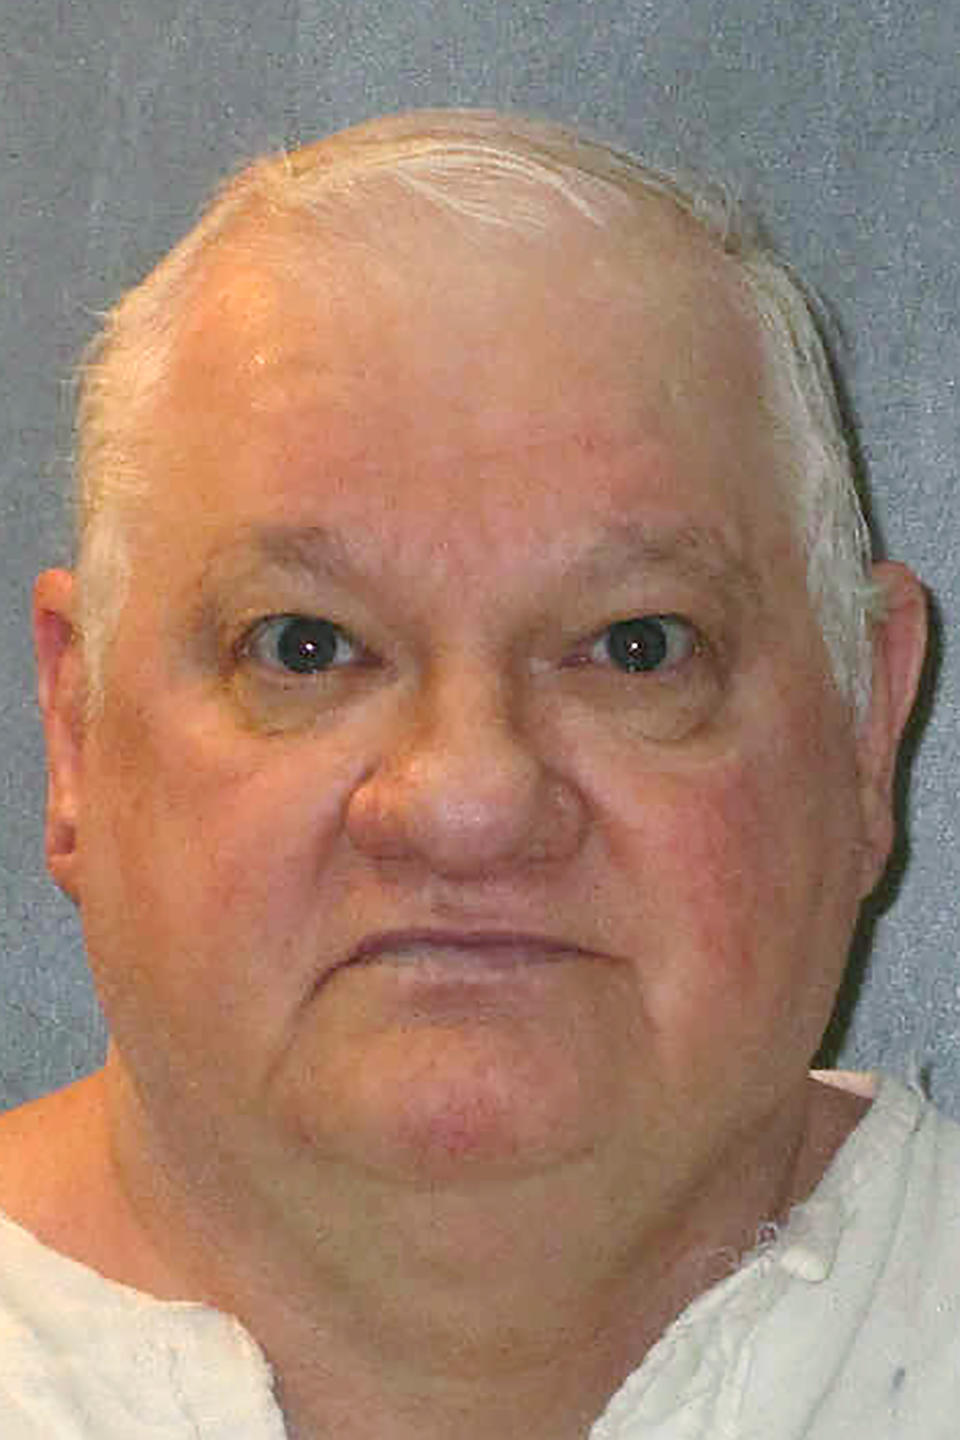 This undated photo provided by the Texas Department of Criminal Justice shows Billy Jack Crutsinger. Texas death row inmate Crutsinger is facing execution Wednesday, Sept. 4, 2019, for fatally stabbing an 89-year-old woman and her daughter more than 16 years ago after entering their Fort Worth home under the pretense of doing some work for them. (Texas Department of Criminal Justice via AP)